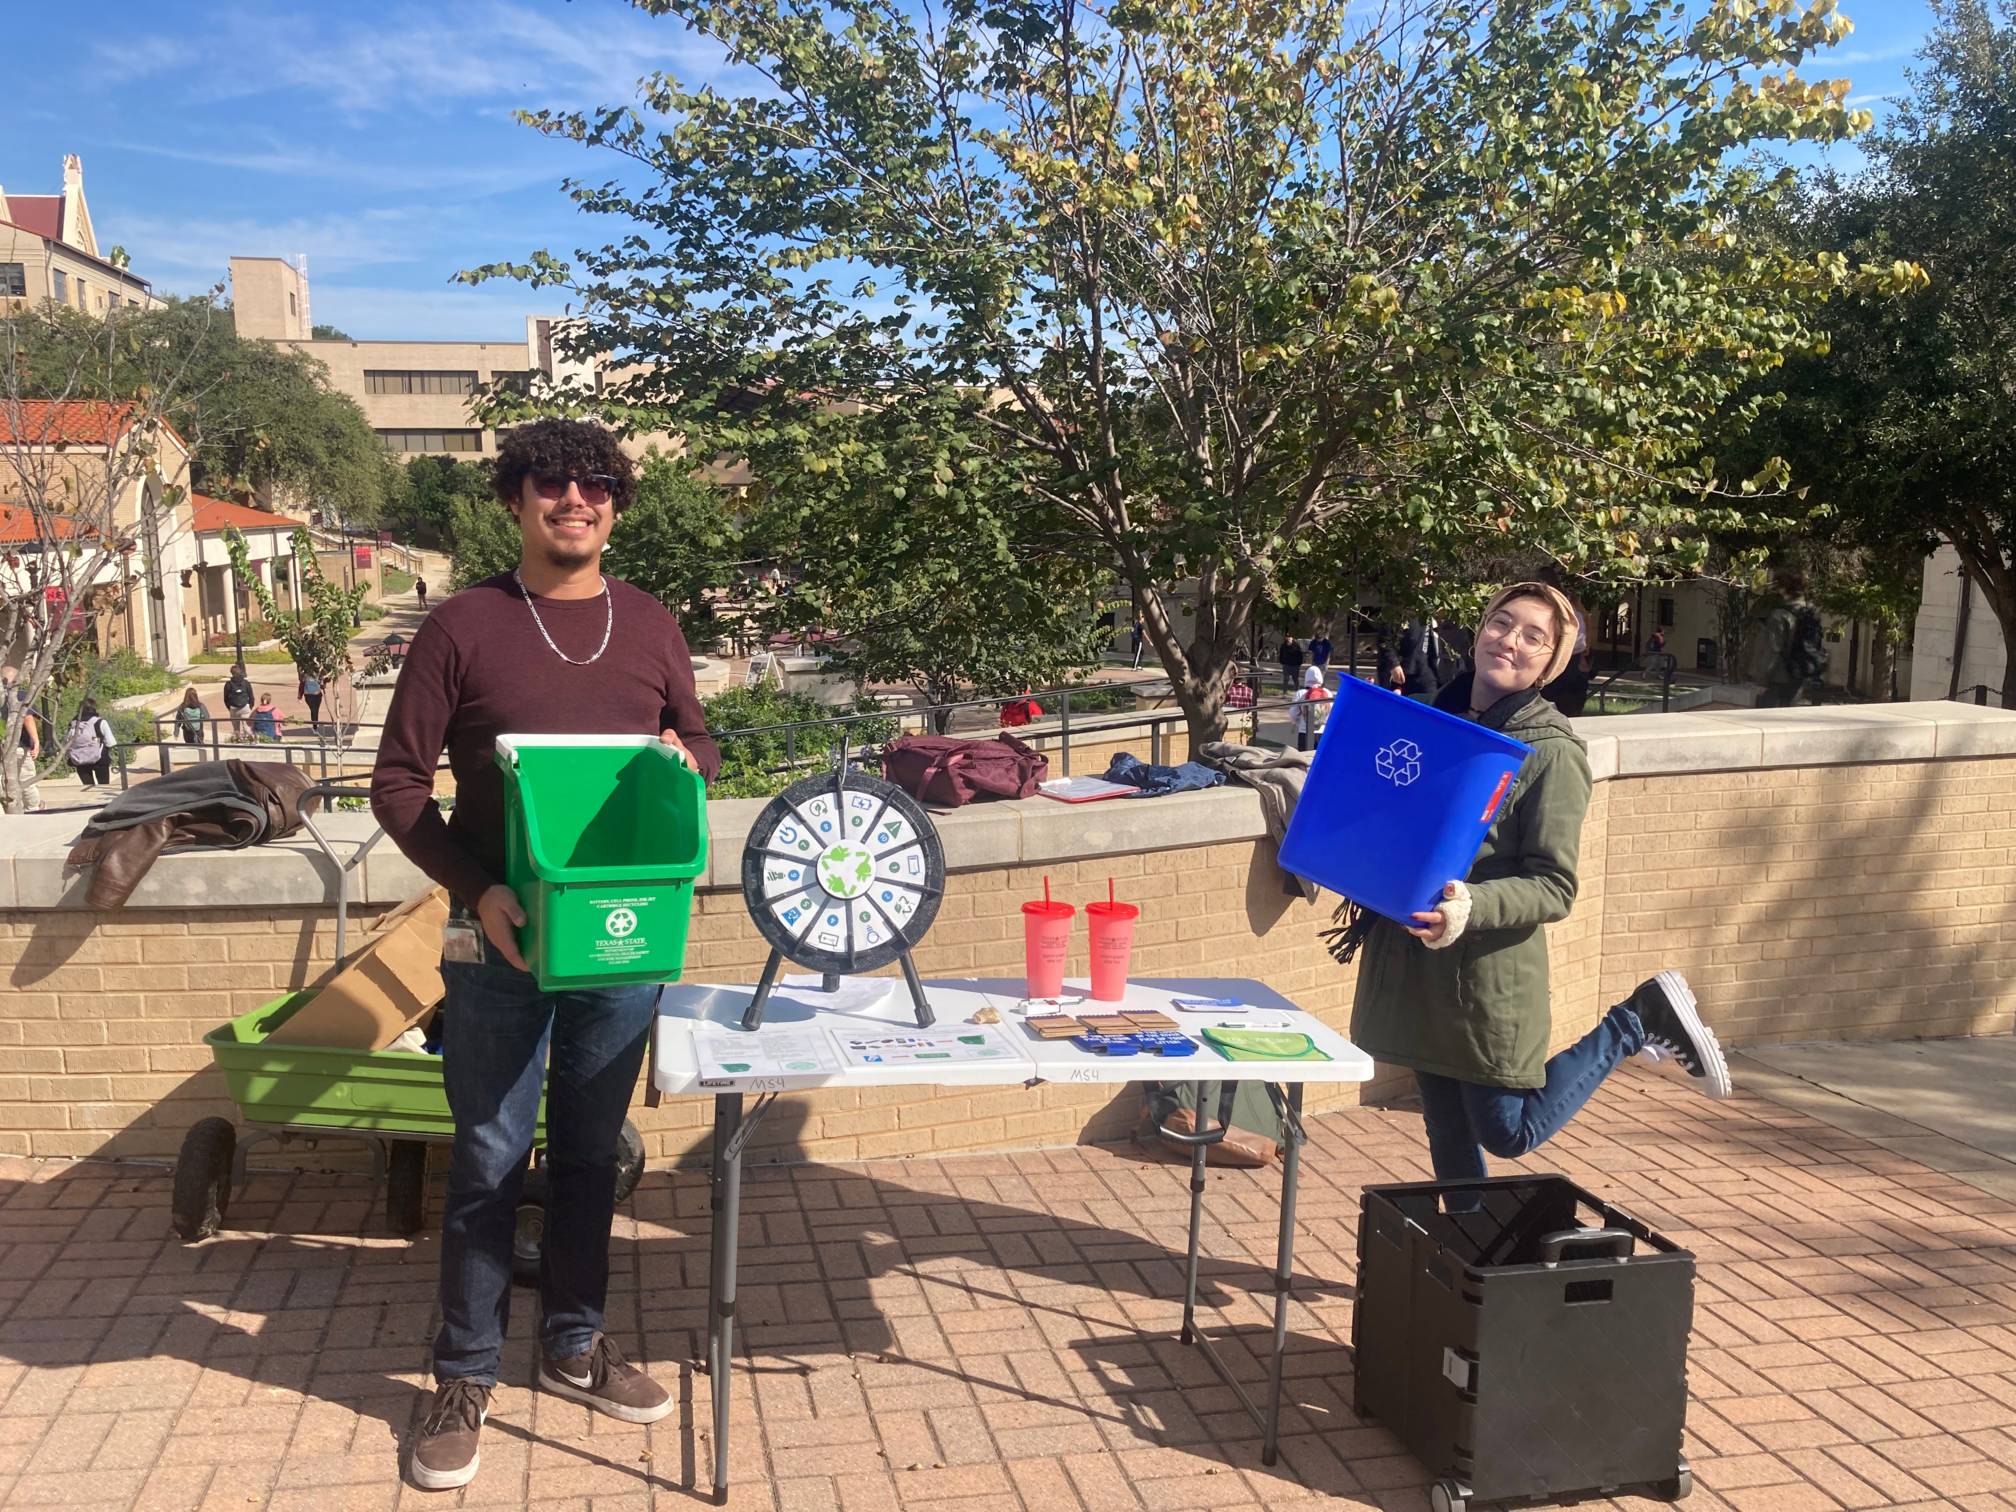 Two student workers tabling on the Quad to educate students about recycling opportunities on campus.